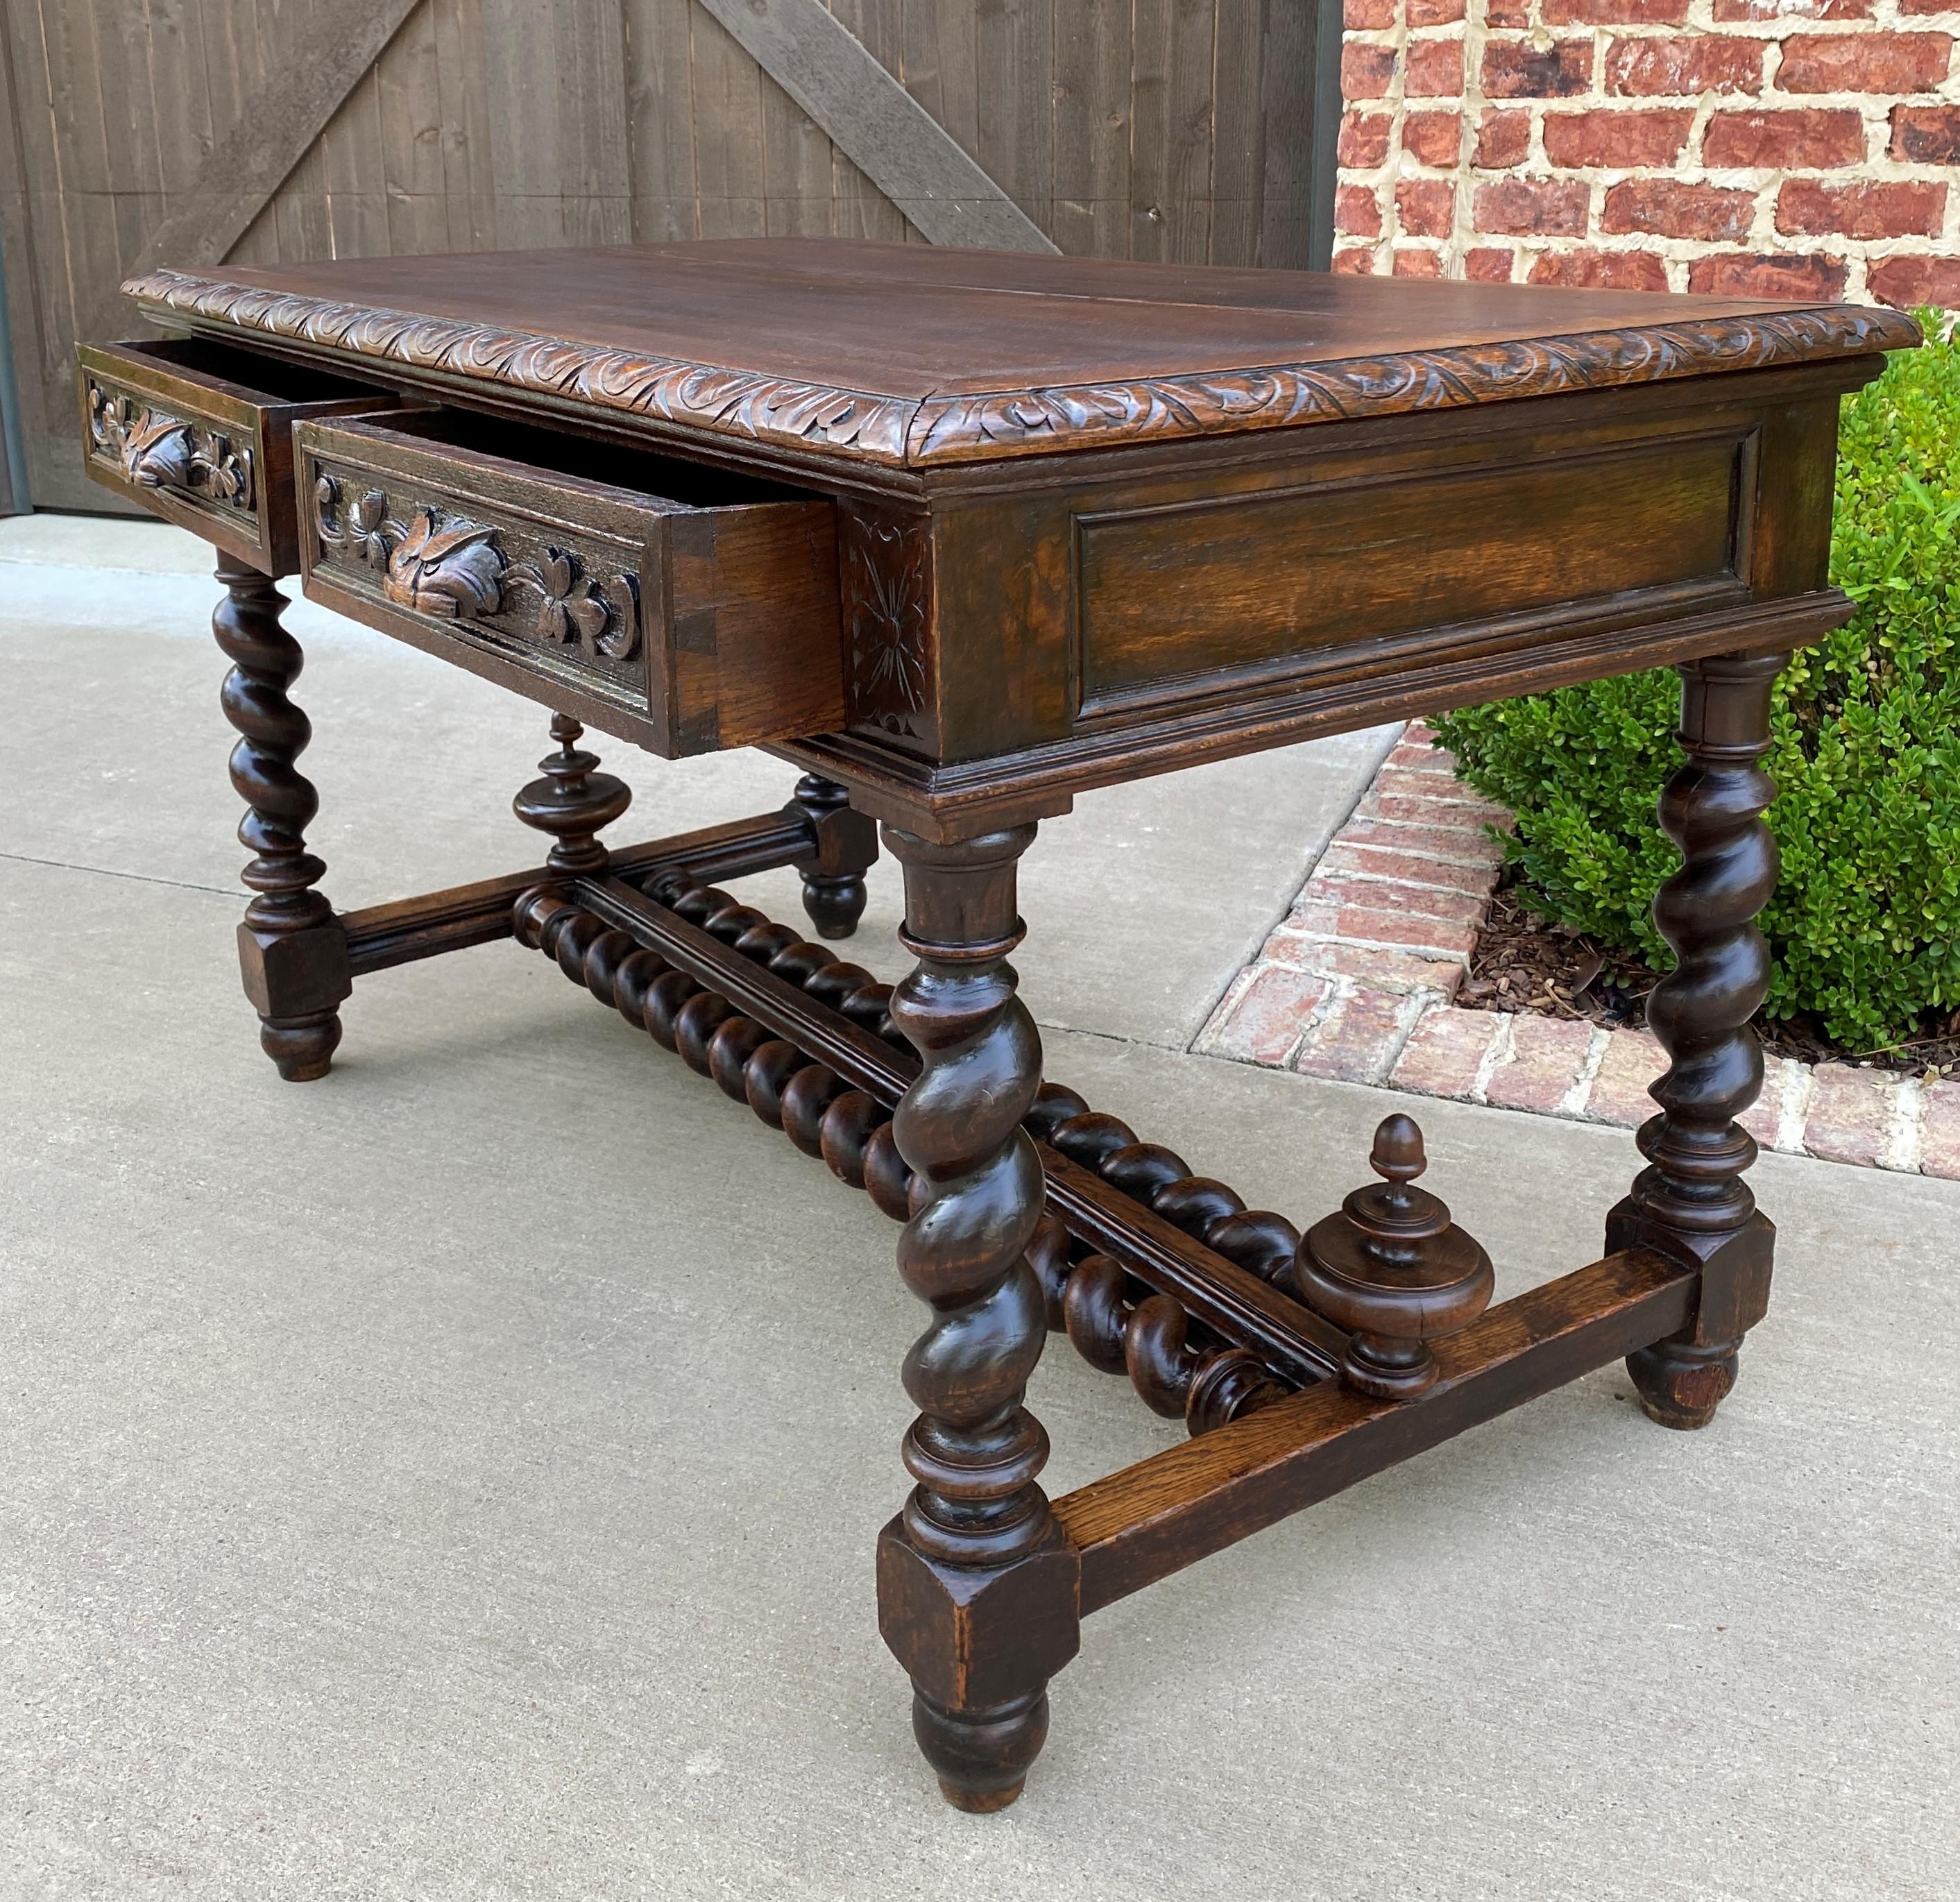 Carved Antique French Desk Table with Drawers Oak Barley Twist Library Study Office 19C